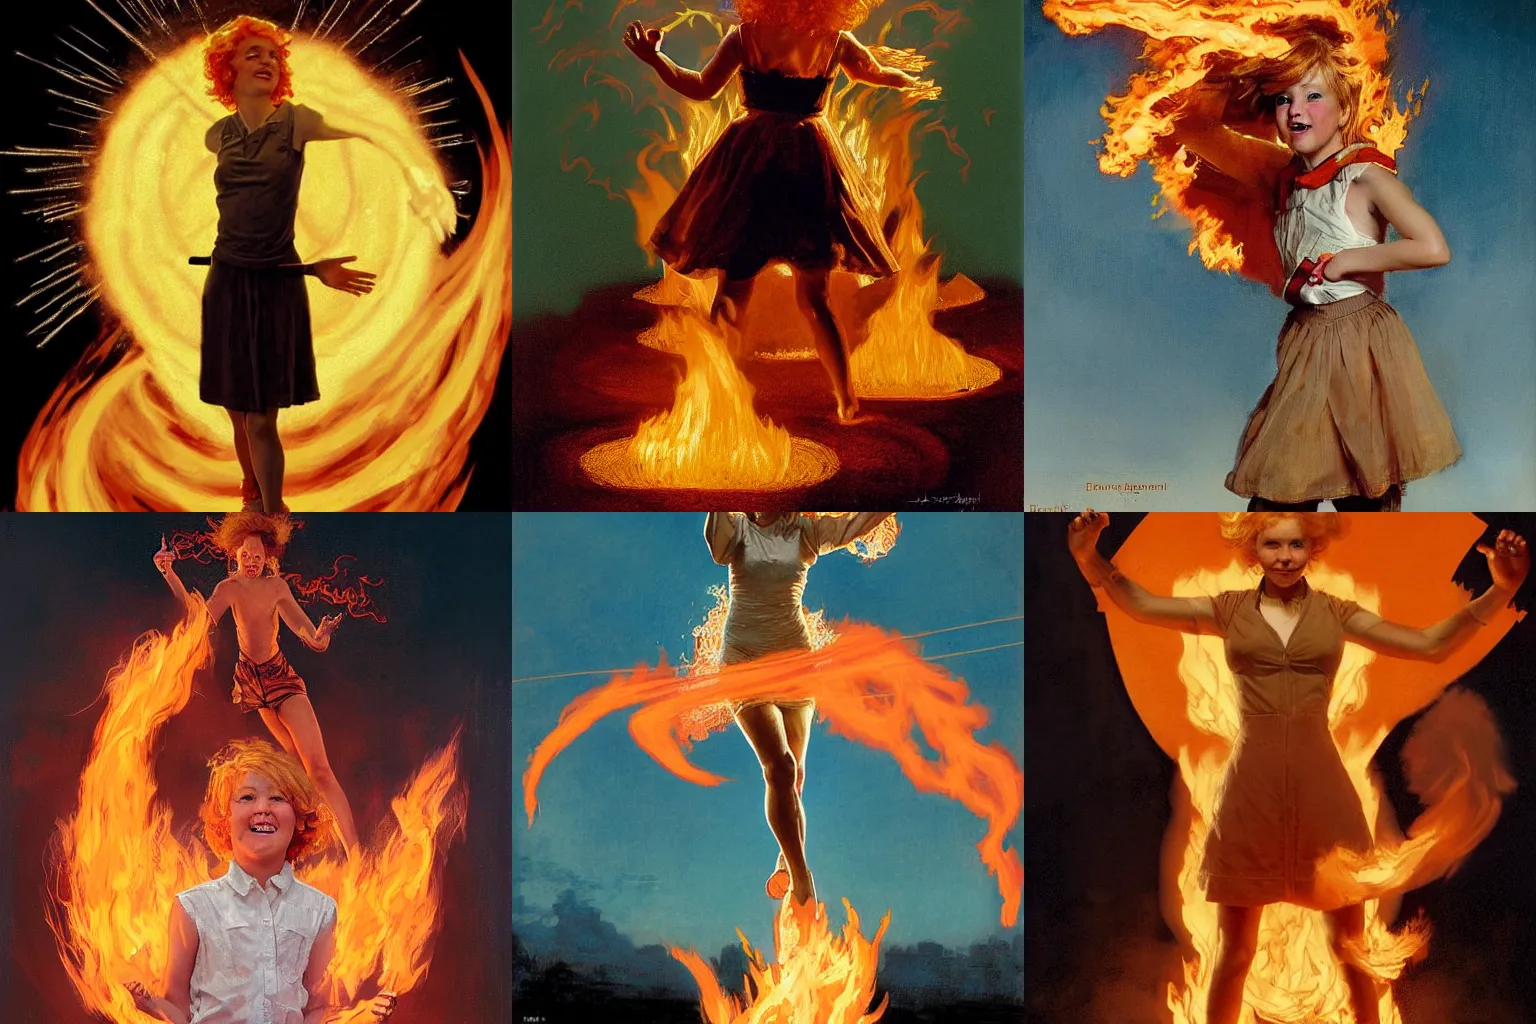 Prompt: a girl with short orange blond hair standing triumphantly in a ring of fire and flames. Wisps of fire controlled at her fingertips. By Geoffroy Thoorens Norman Rockwell and Dan Volbert.